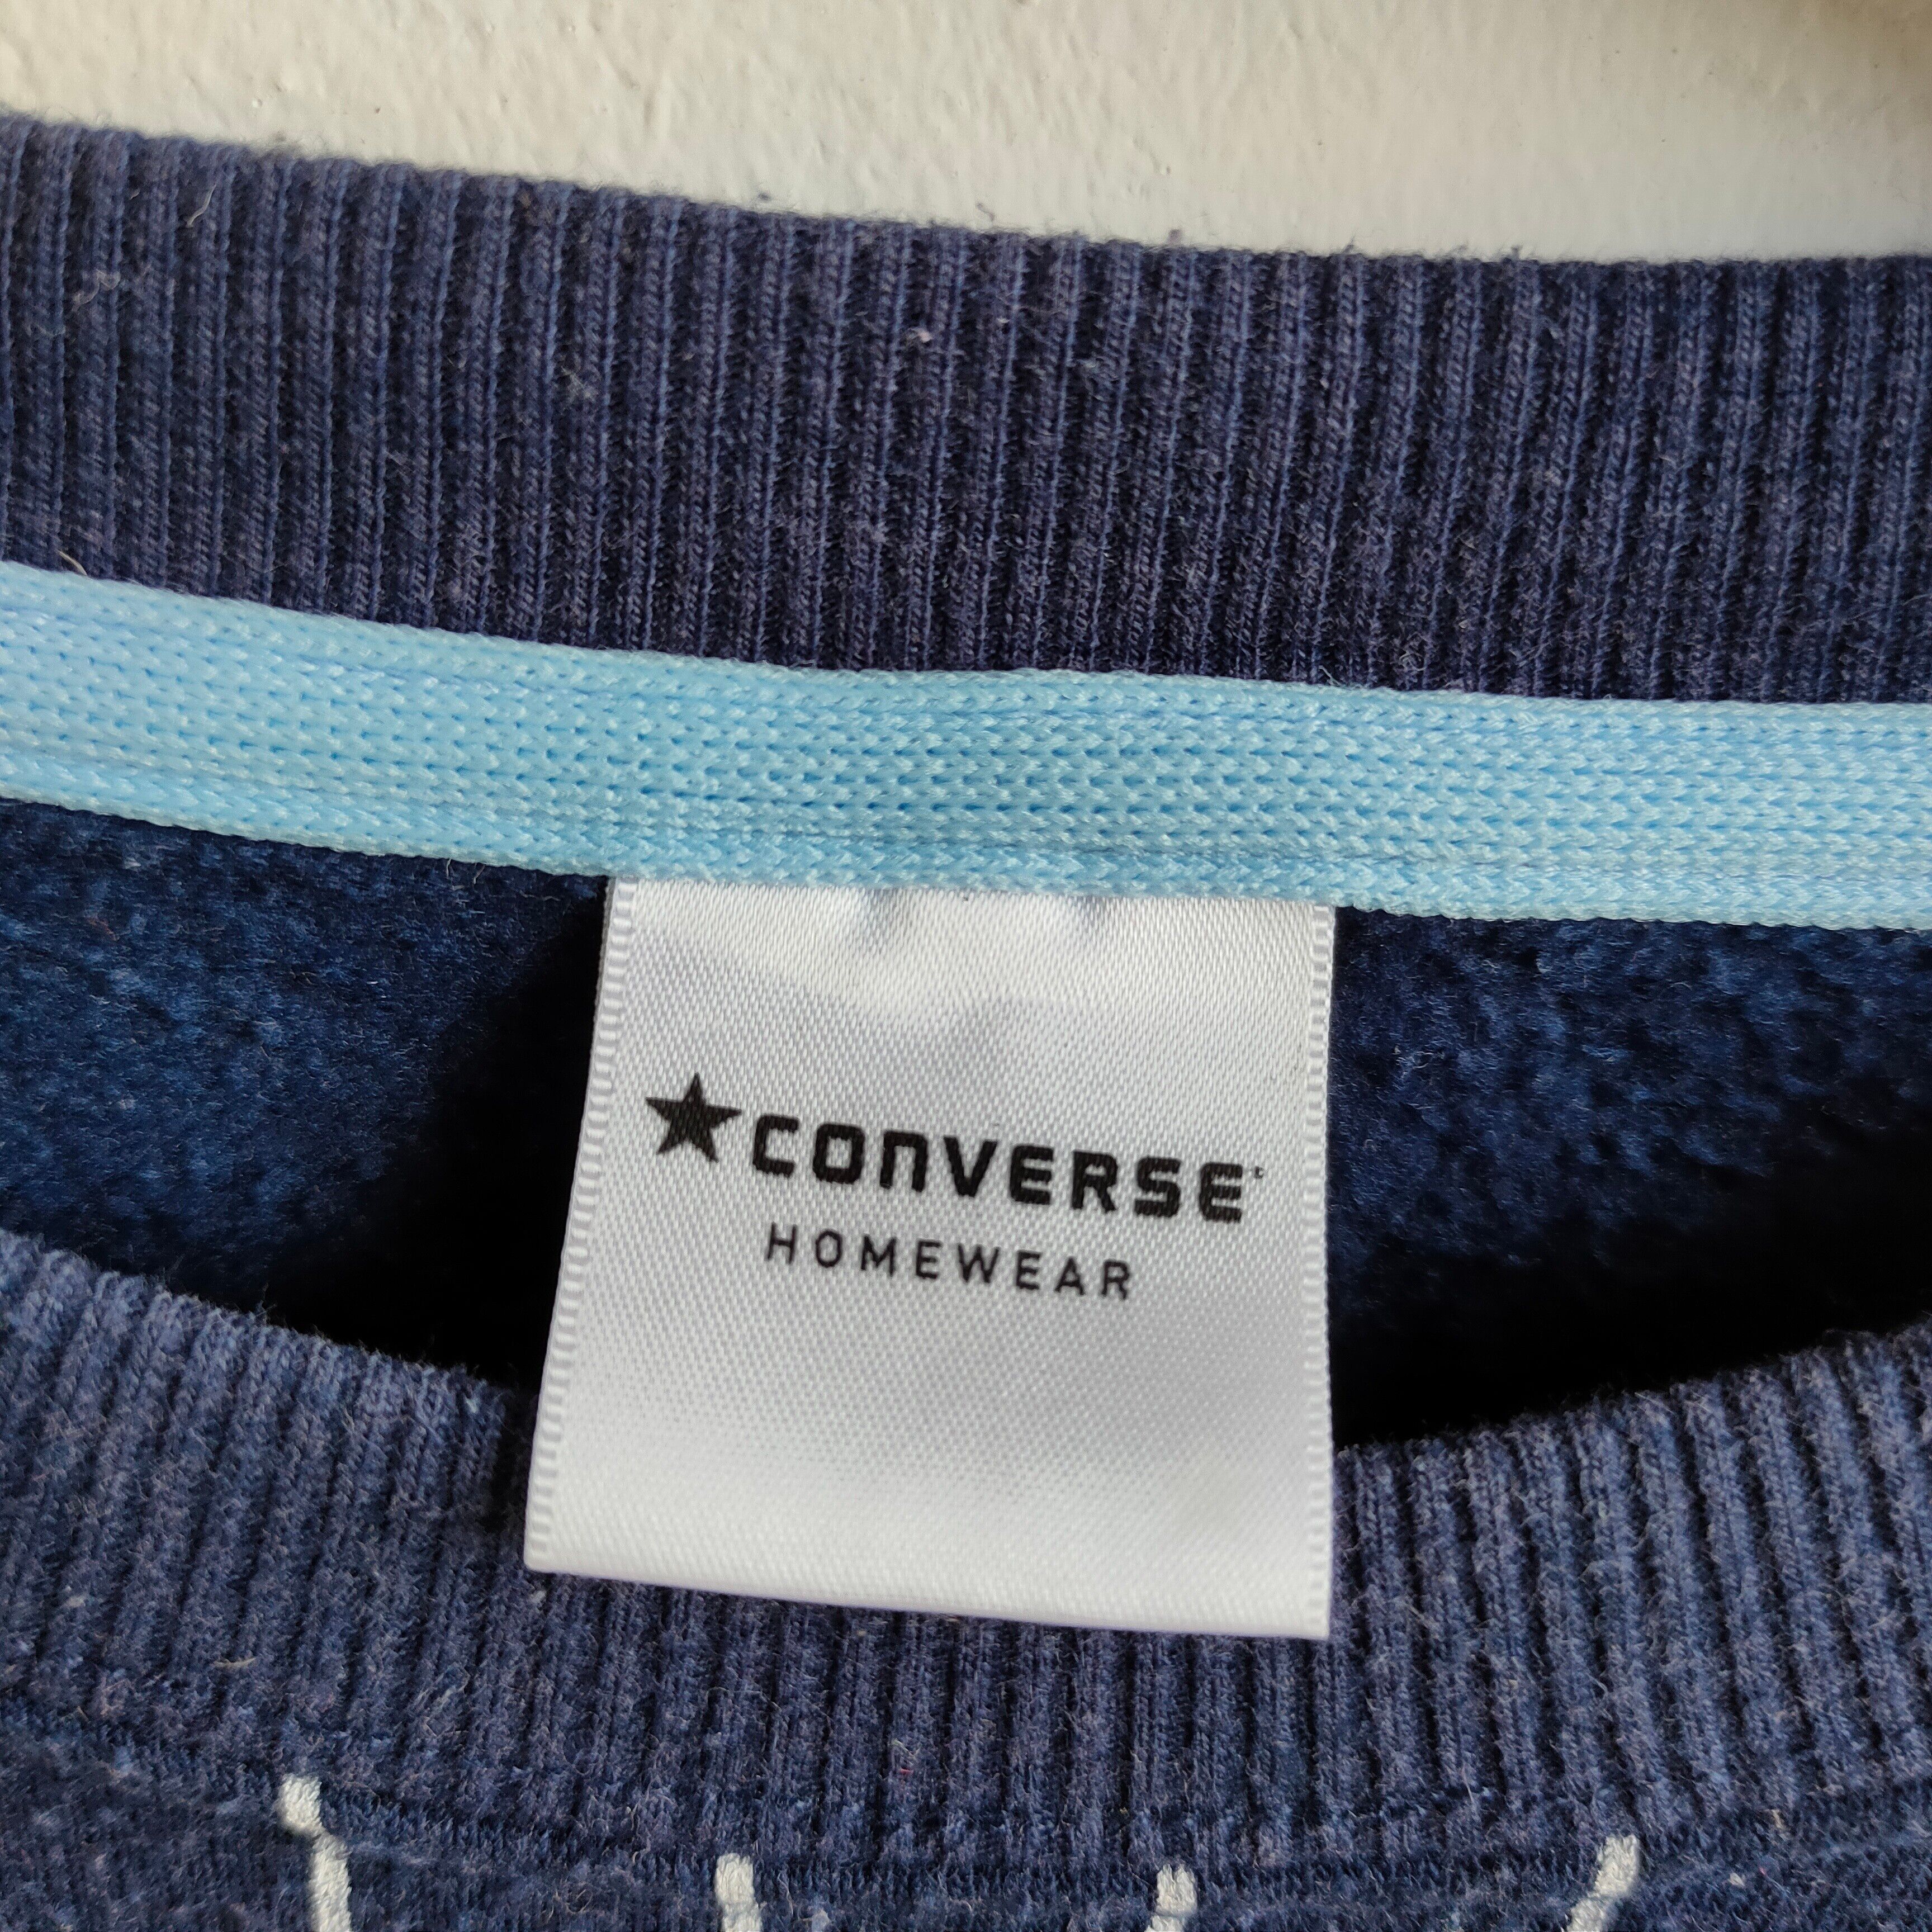 CONVERSE Big Embroidery Spell Out Stripe Pattern Sweatshirt - 3